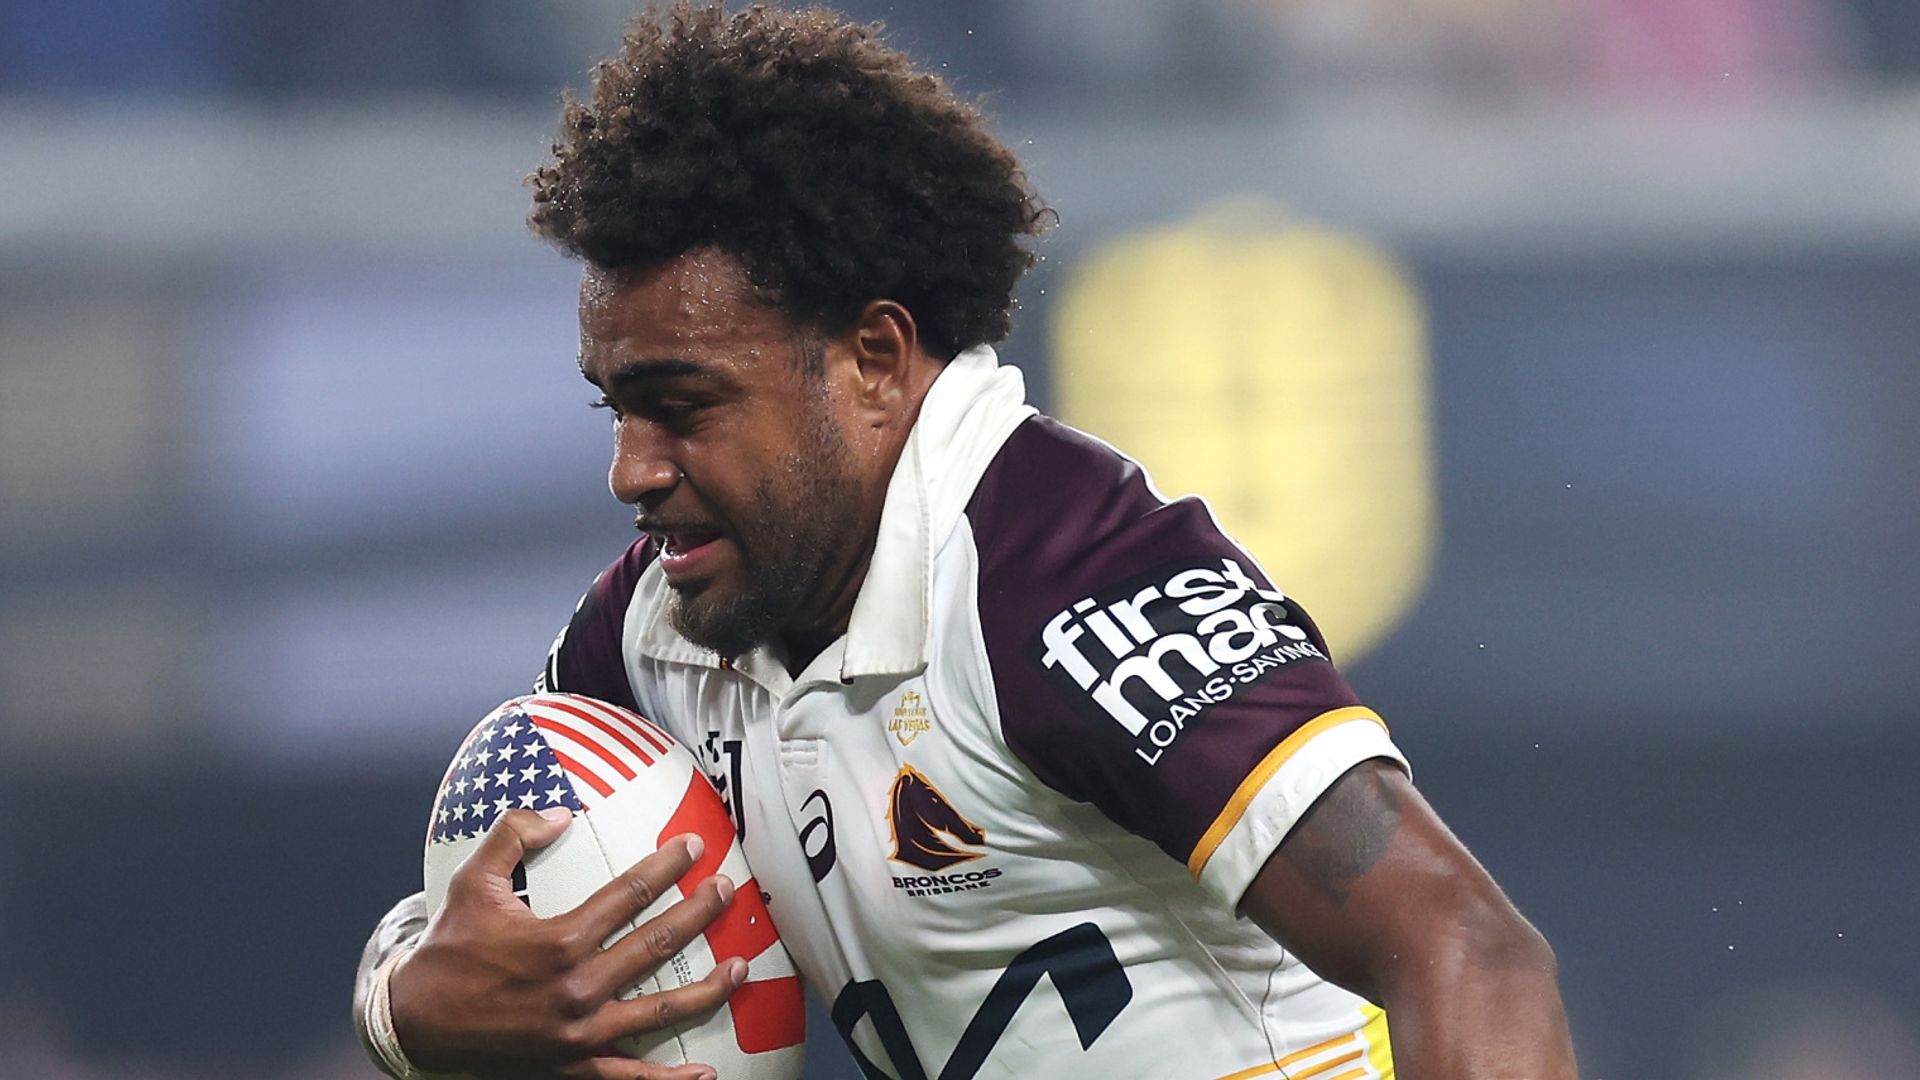 NRL player accuses opponent of using racial slur